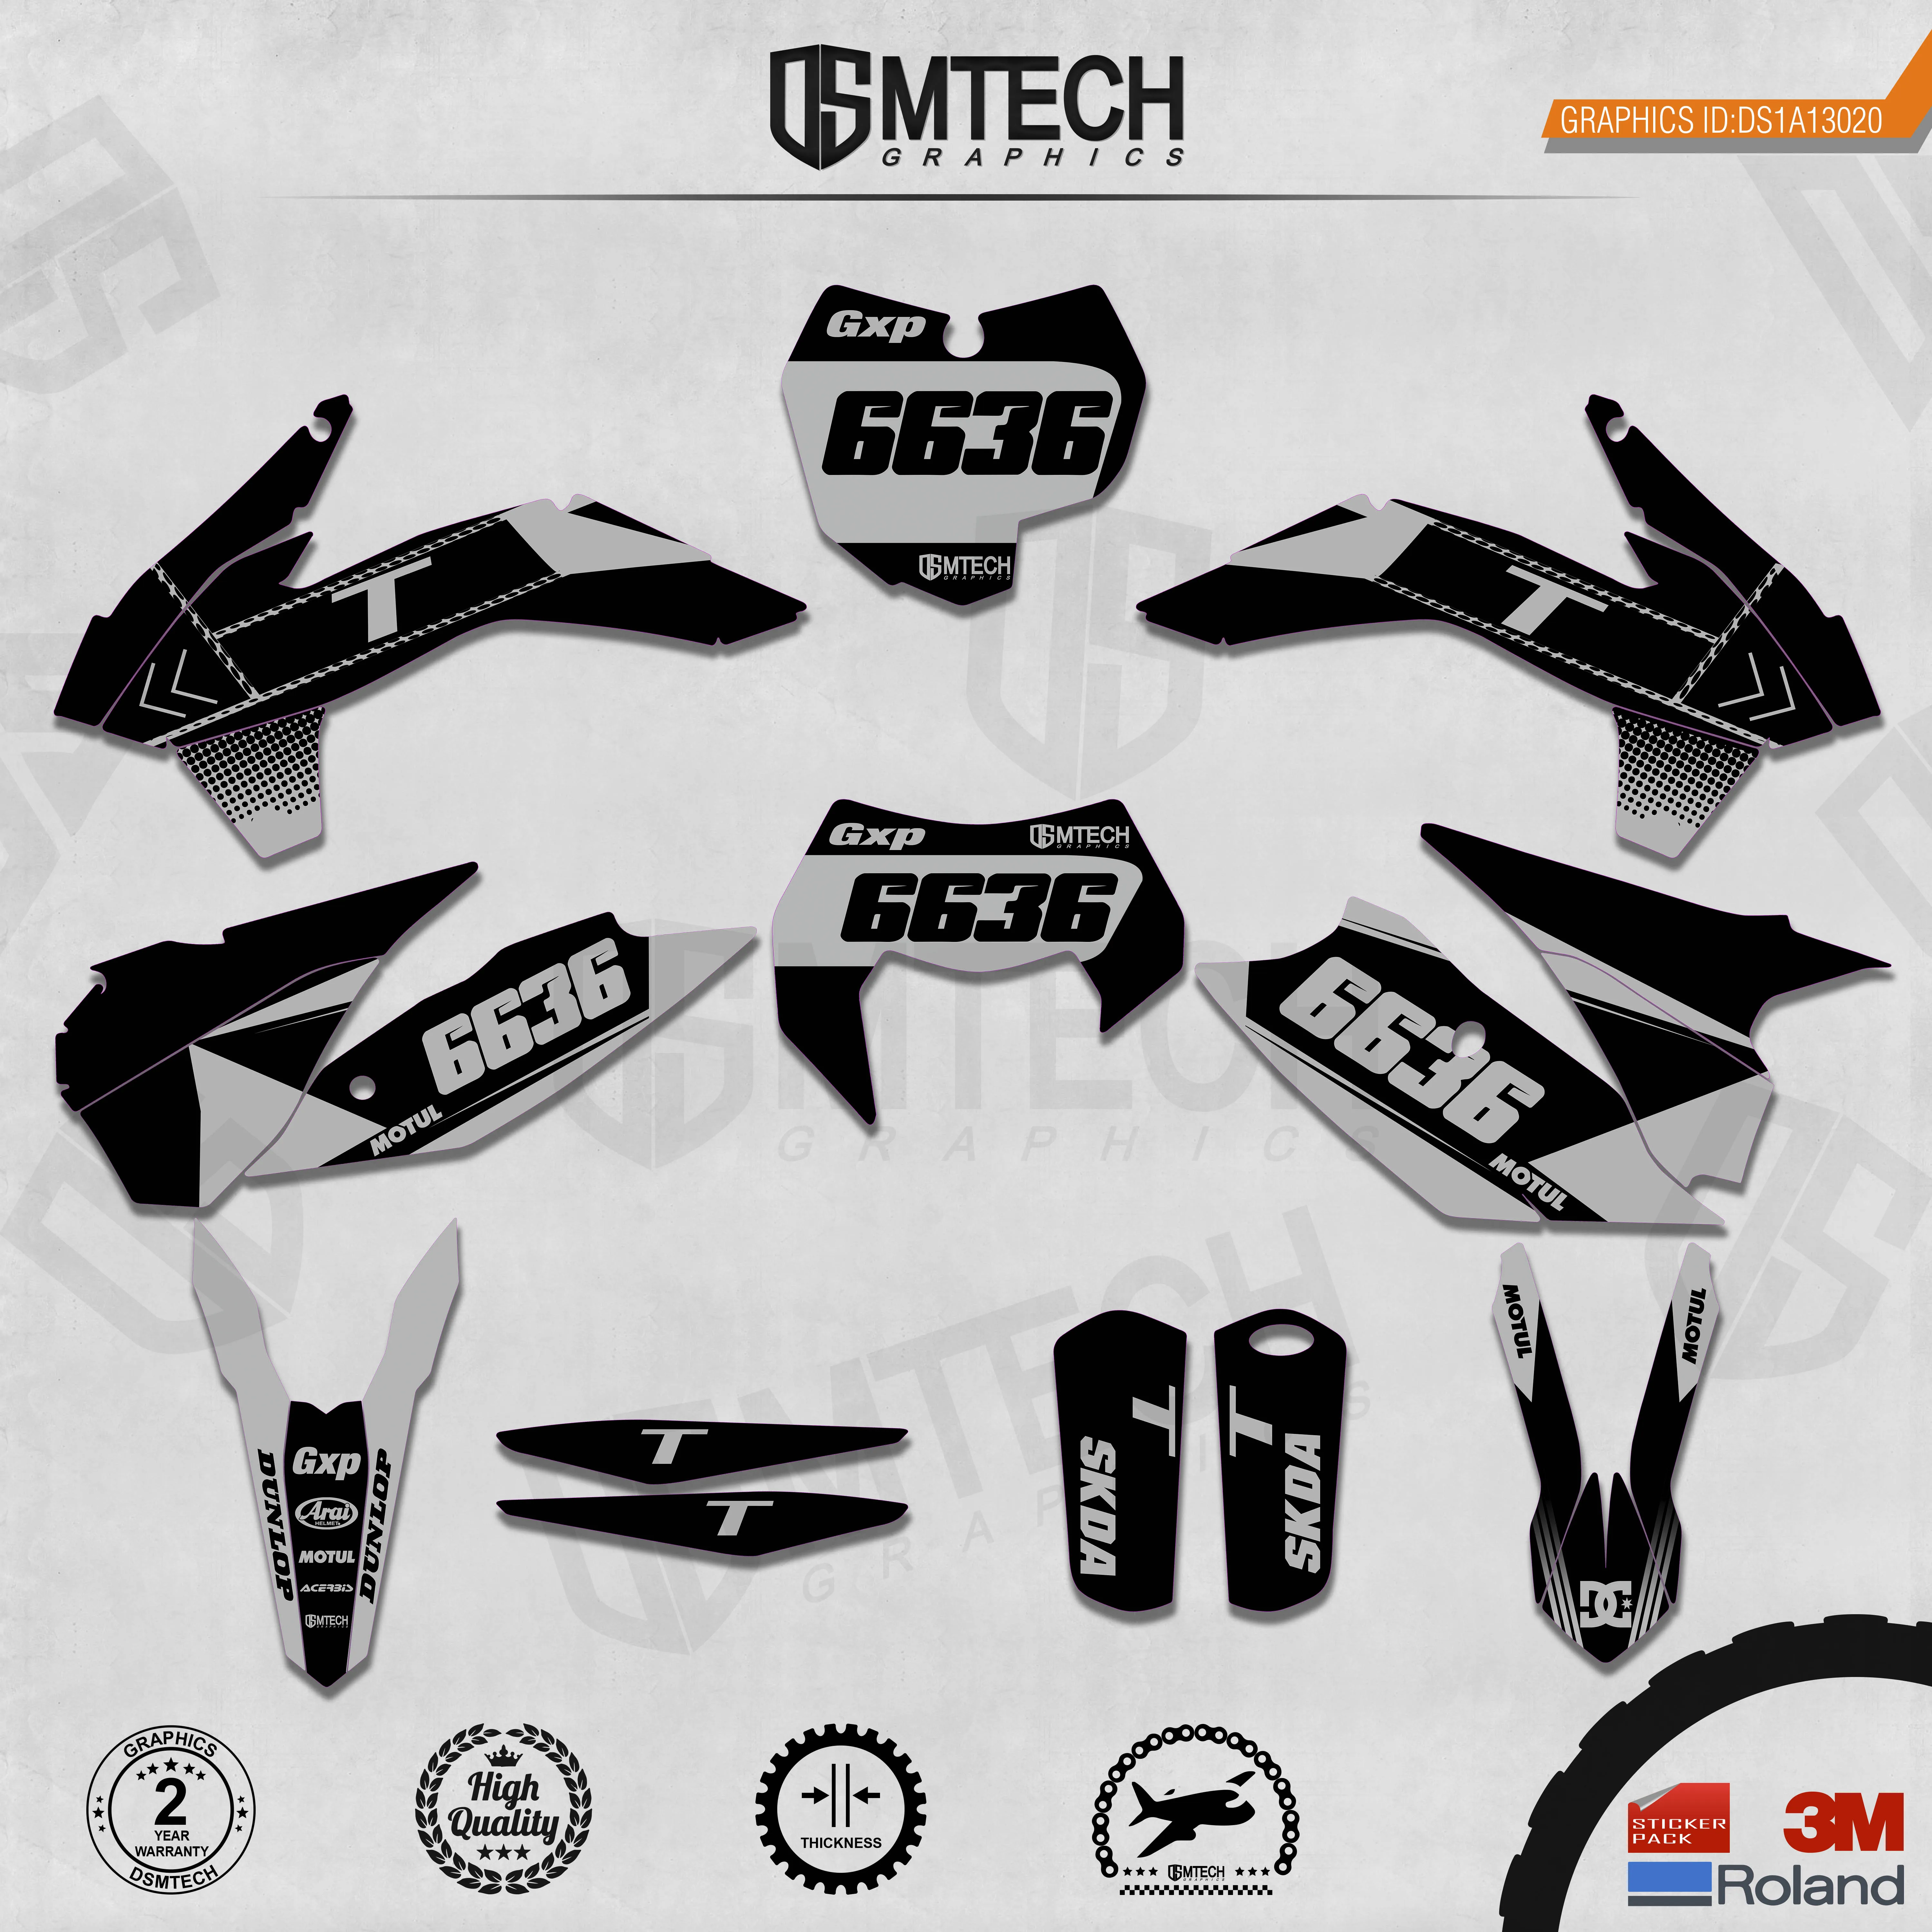 DSMTECH Customized Team Graphics Backgrounds Decals 3M Custom Stickers For 2013-2014 SXF 2015 SXF 2014-2015 EXC 2016 EXC  020